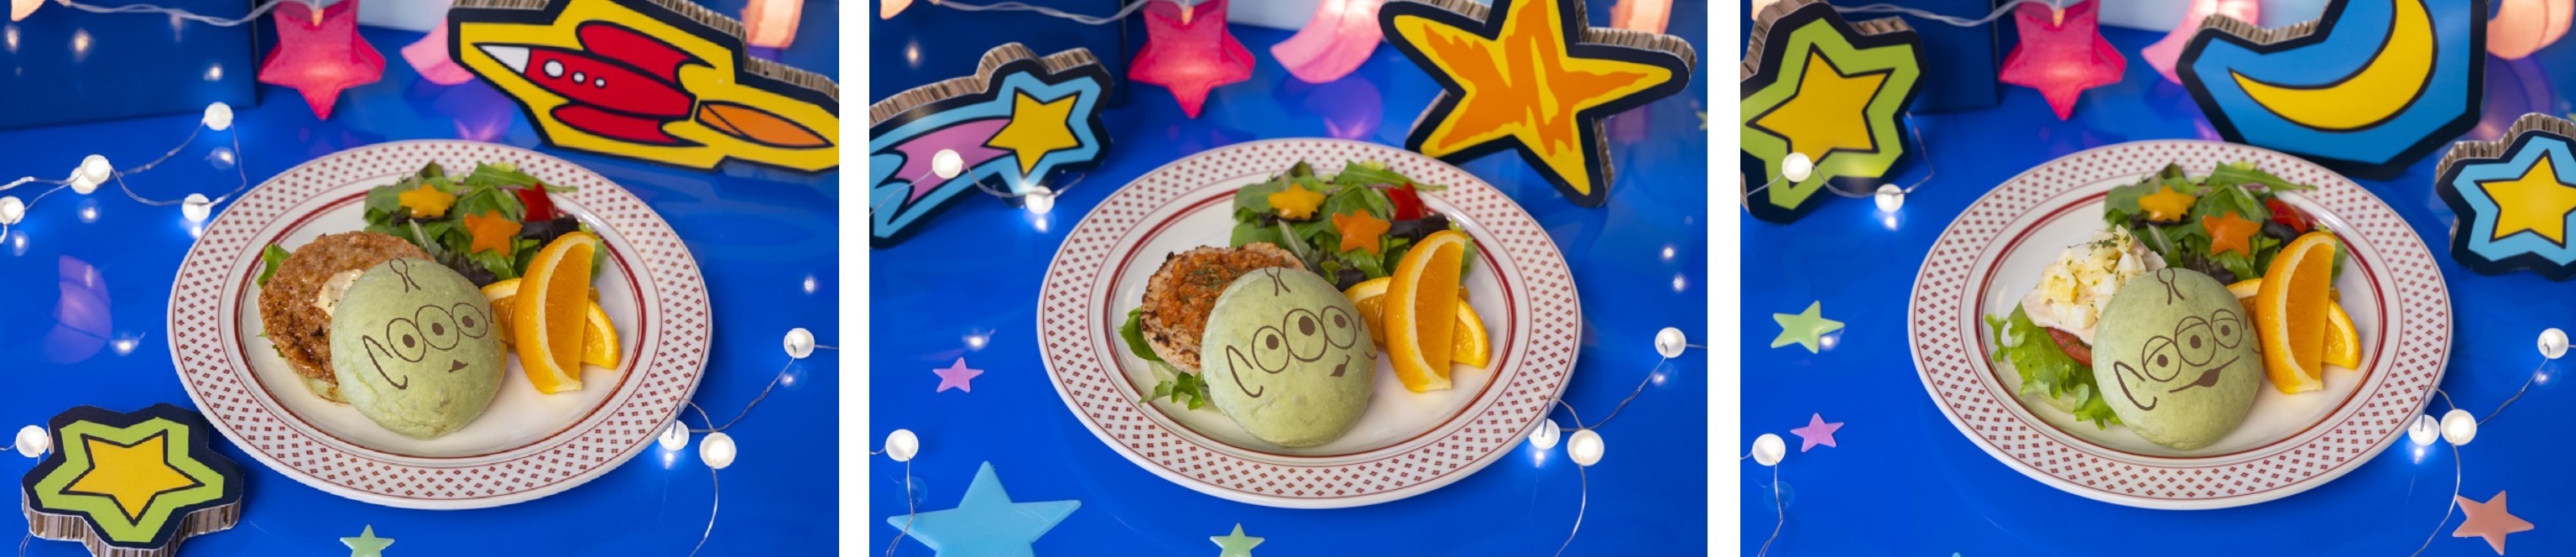 Ryokotomo - 1658101058 989 3c0c5400 toy story aliens cafe to open in tokyo osaka and